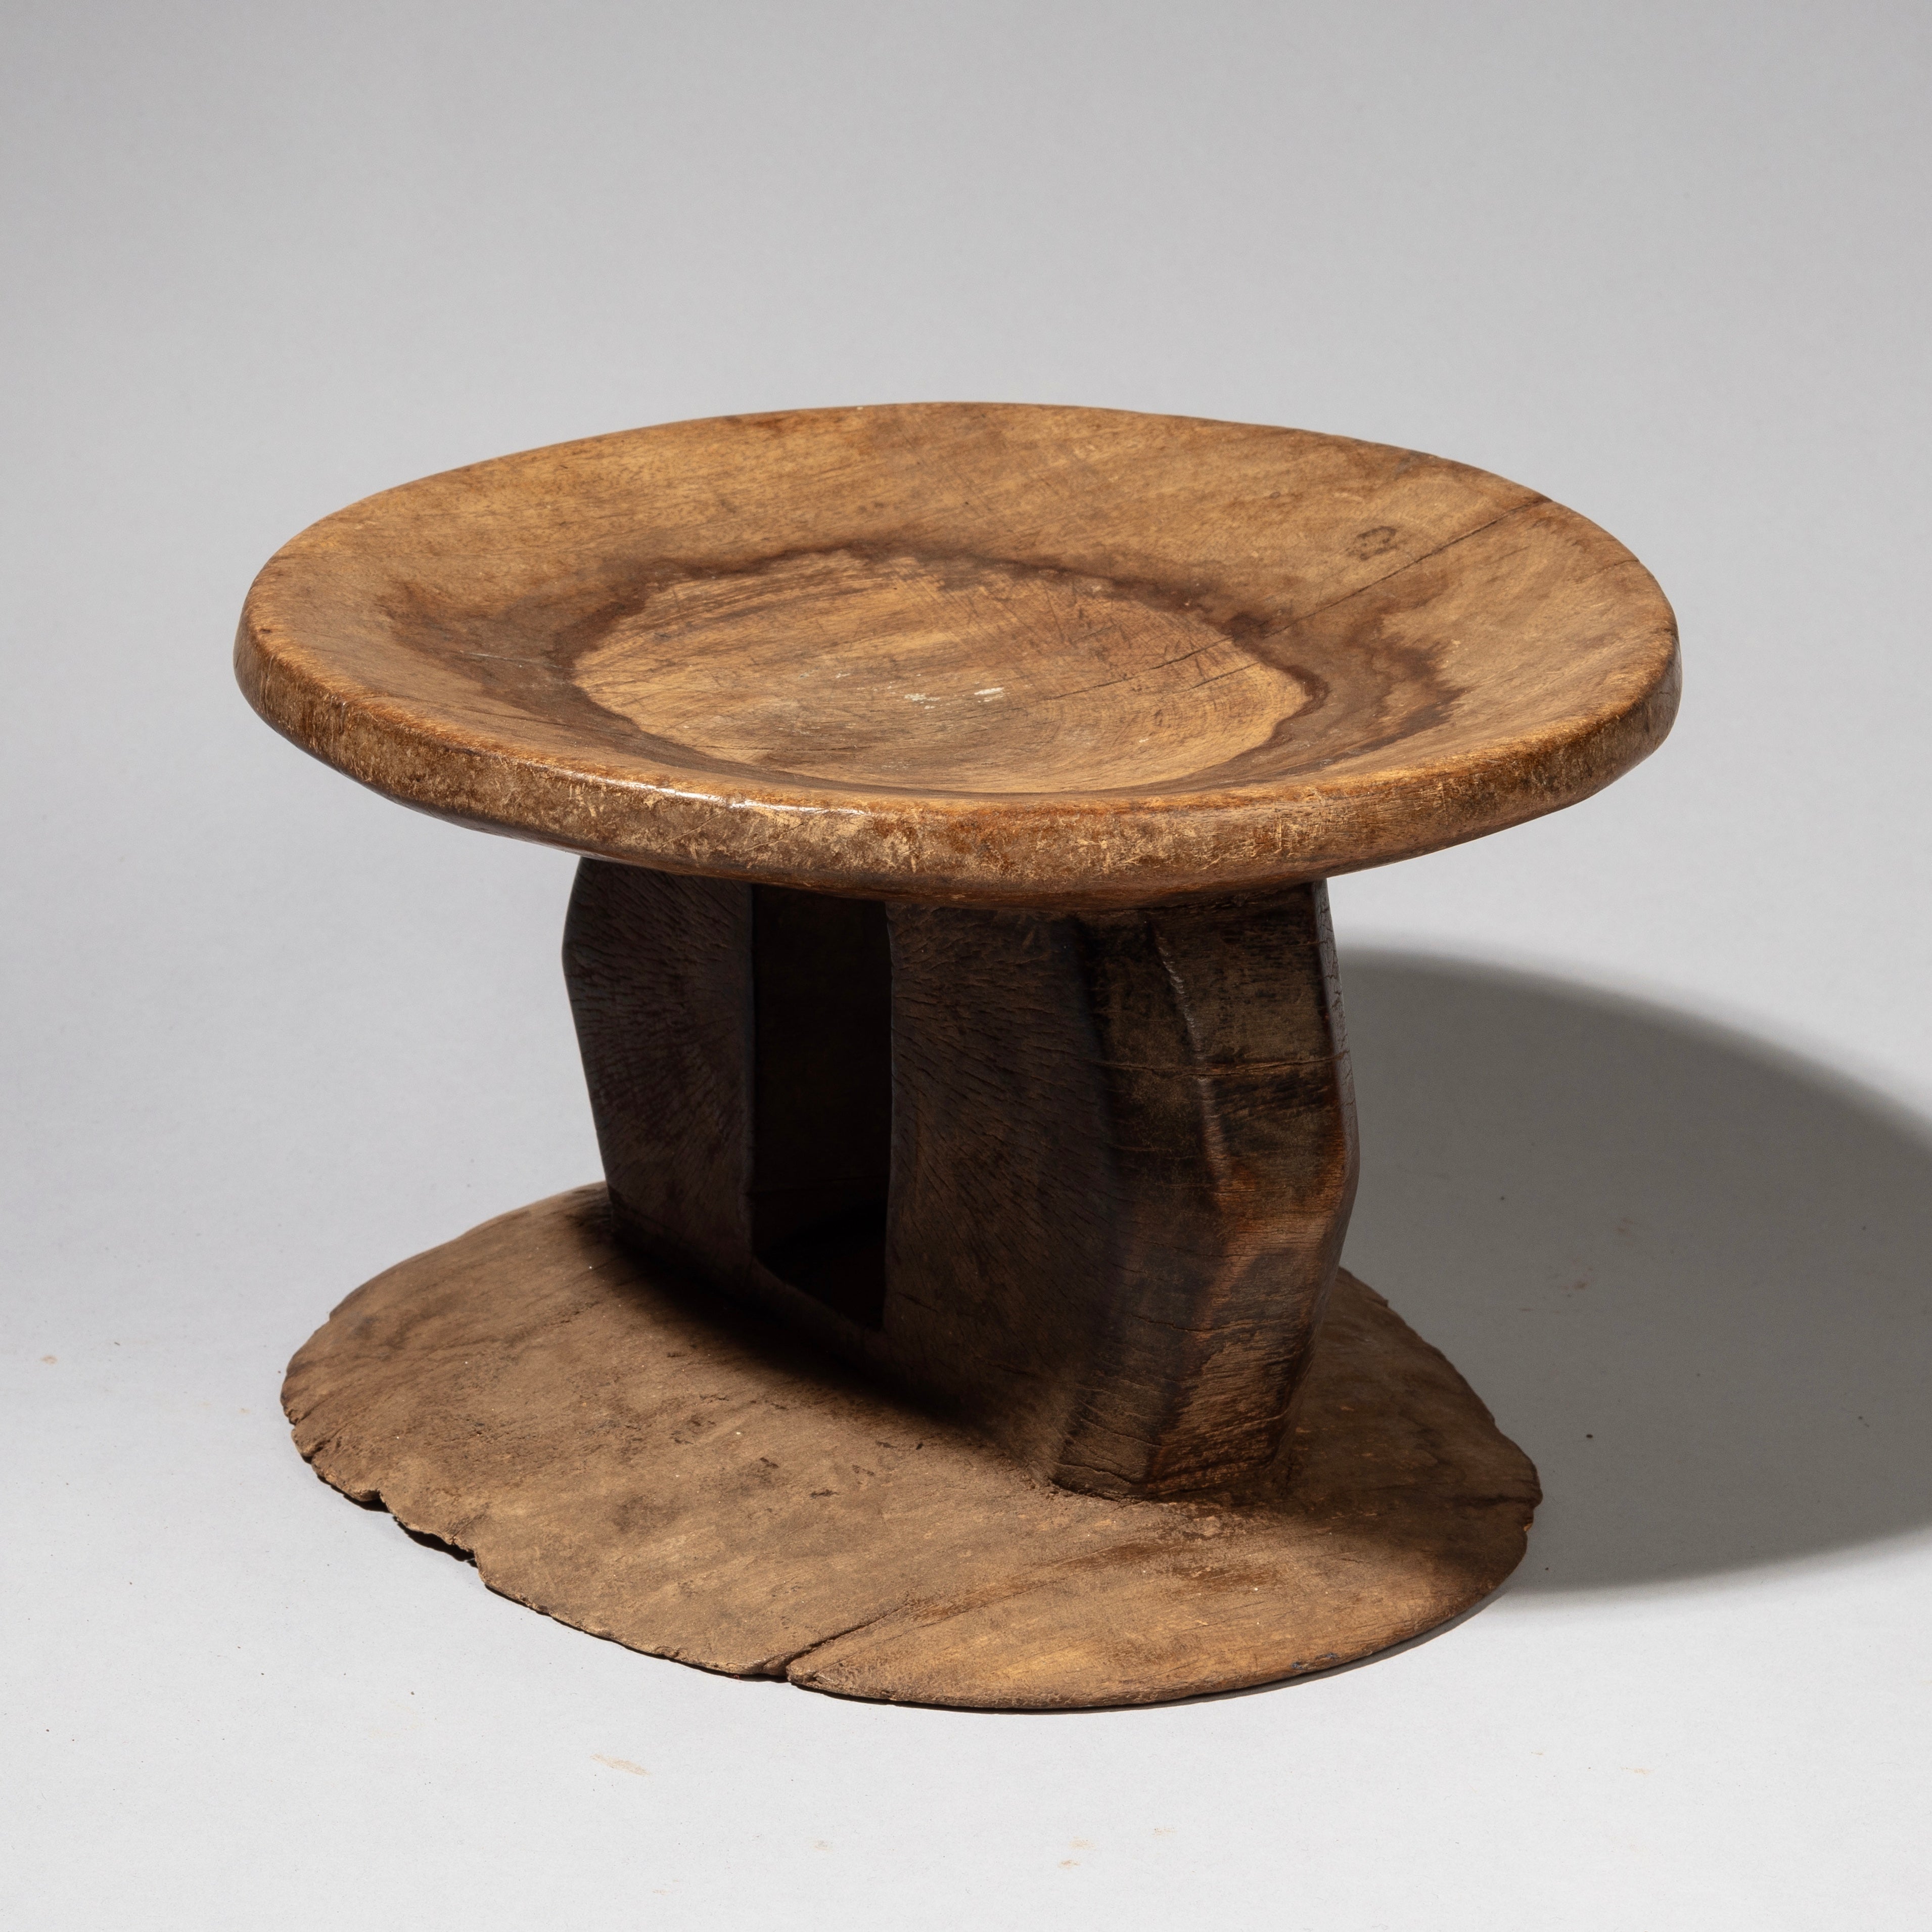 A SMALL +SIMPLE STOOL WITH BUILT HANDLE FROM POKOT TRIBE KENYA( No 2195)